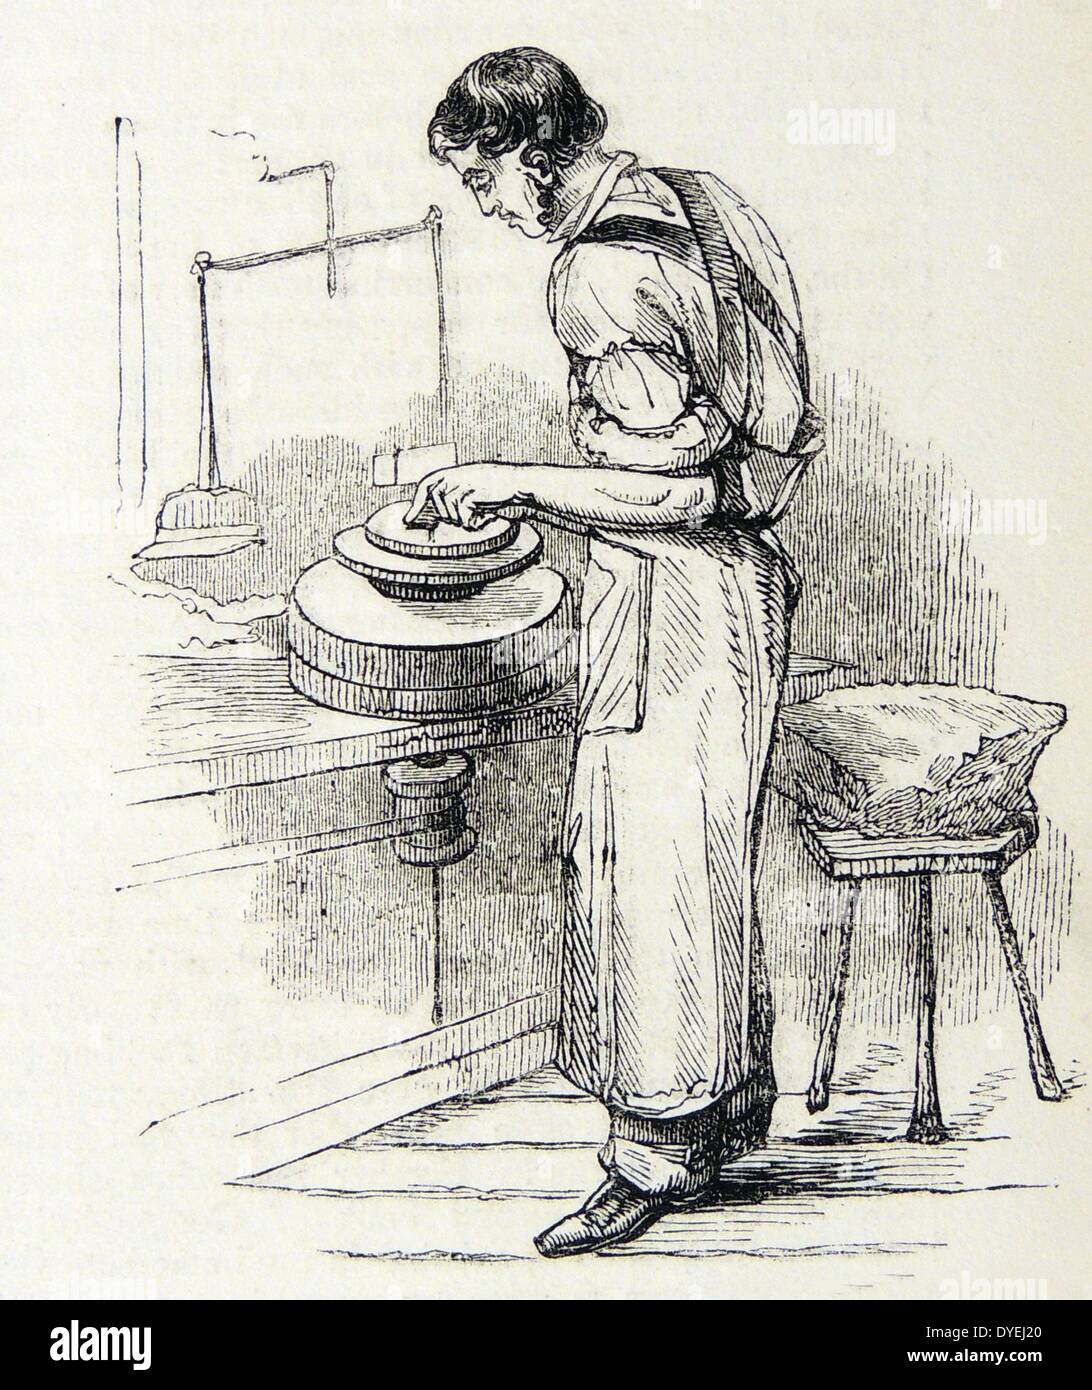 Making dinner plates, The Potteries, Staffordshire, England. Engraving, London, c1851. Stock Photo